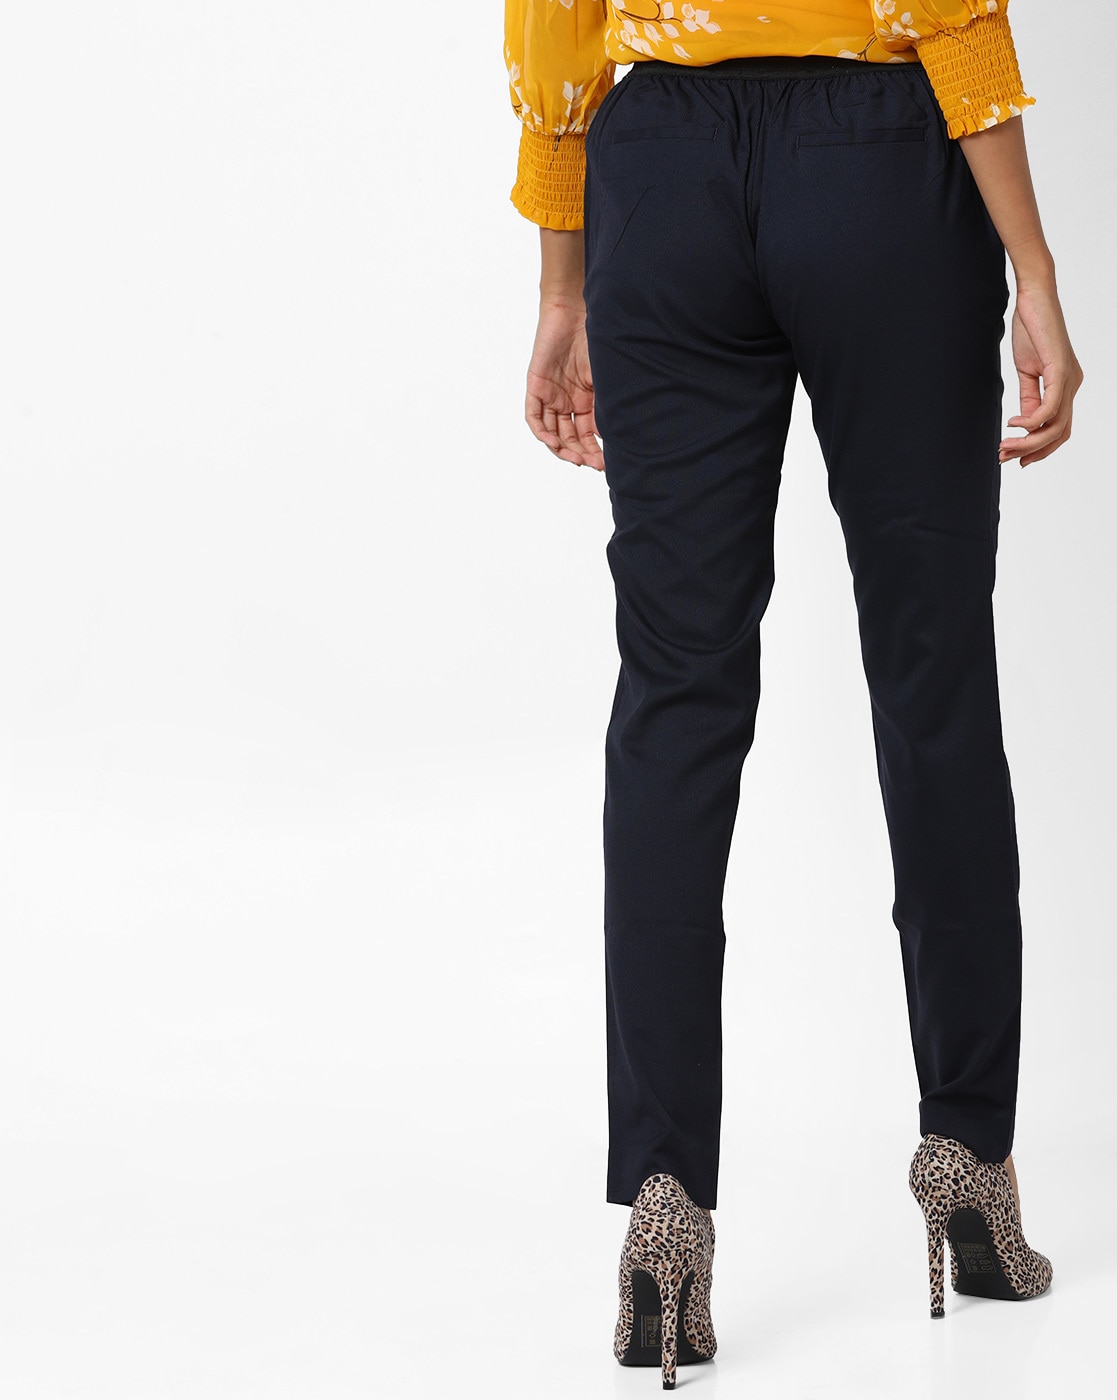 WILLS LIFESTYLE Regular Fit Women Black Trousers  Buy WILLS LIFESTYLE  Regular Fit Women Black Trousers Online at Best Prices in India  Shopsyin